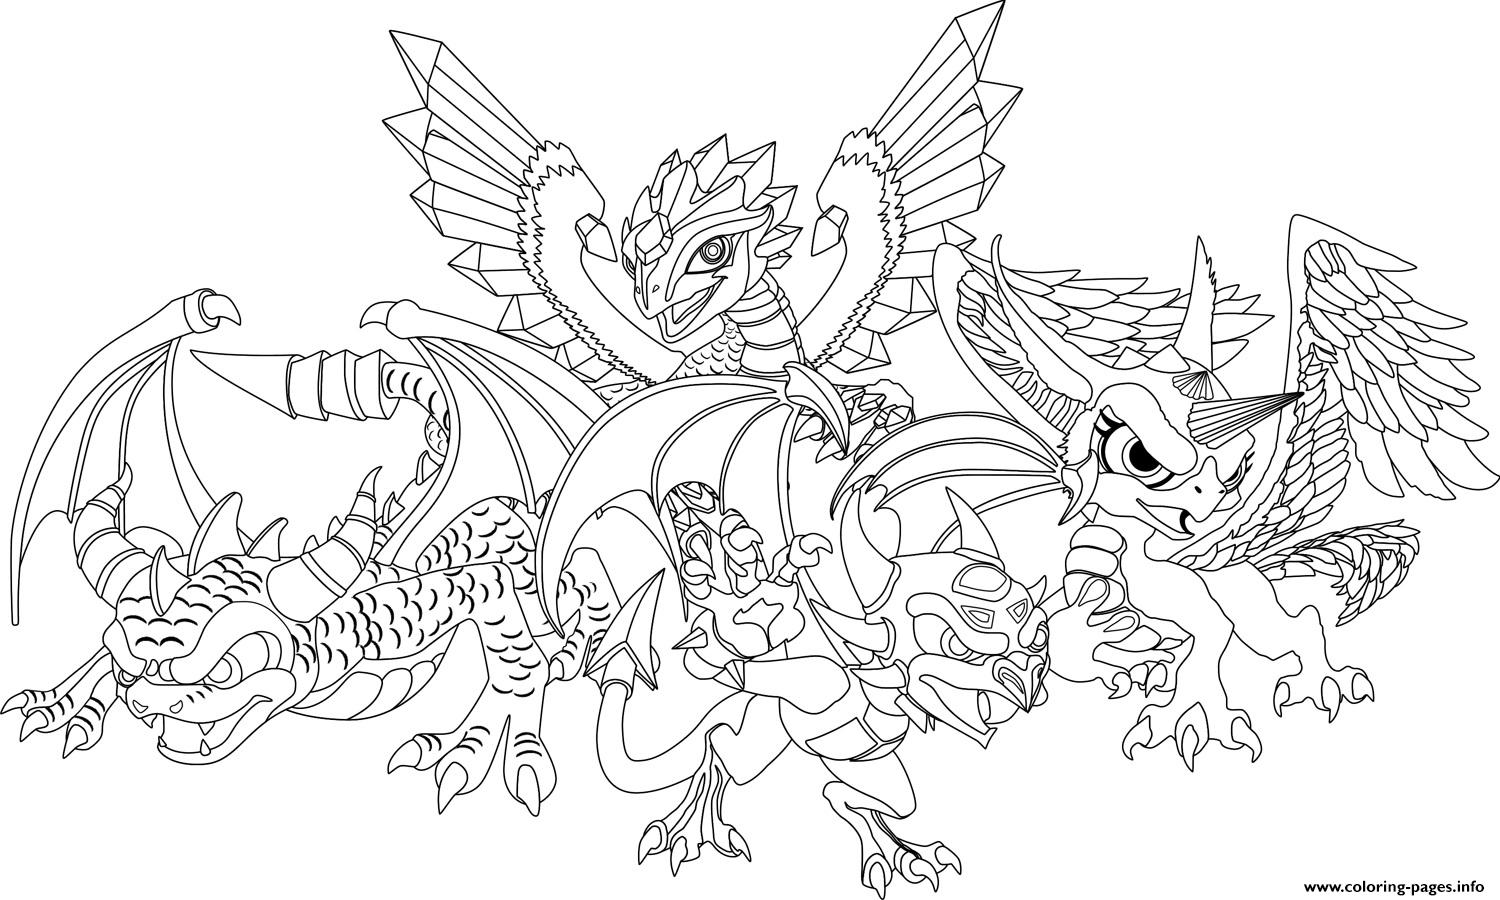 Coloring Pages Printable Dragon / Realistic Dragon Coloring Pages For Adults Coloring Home